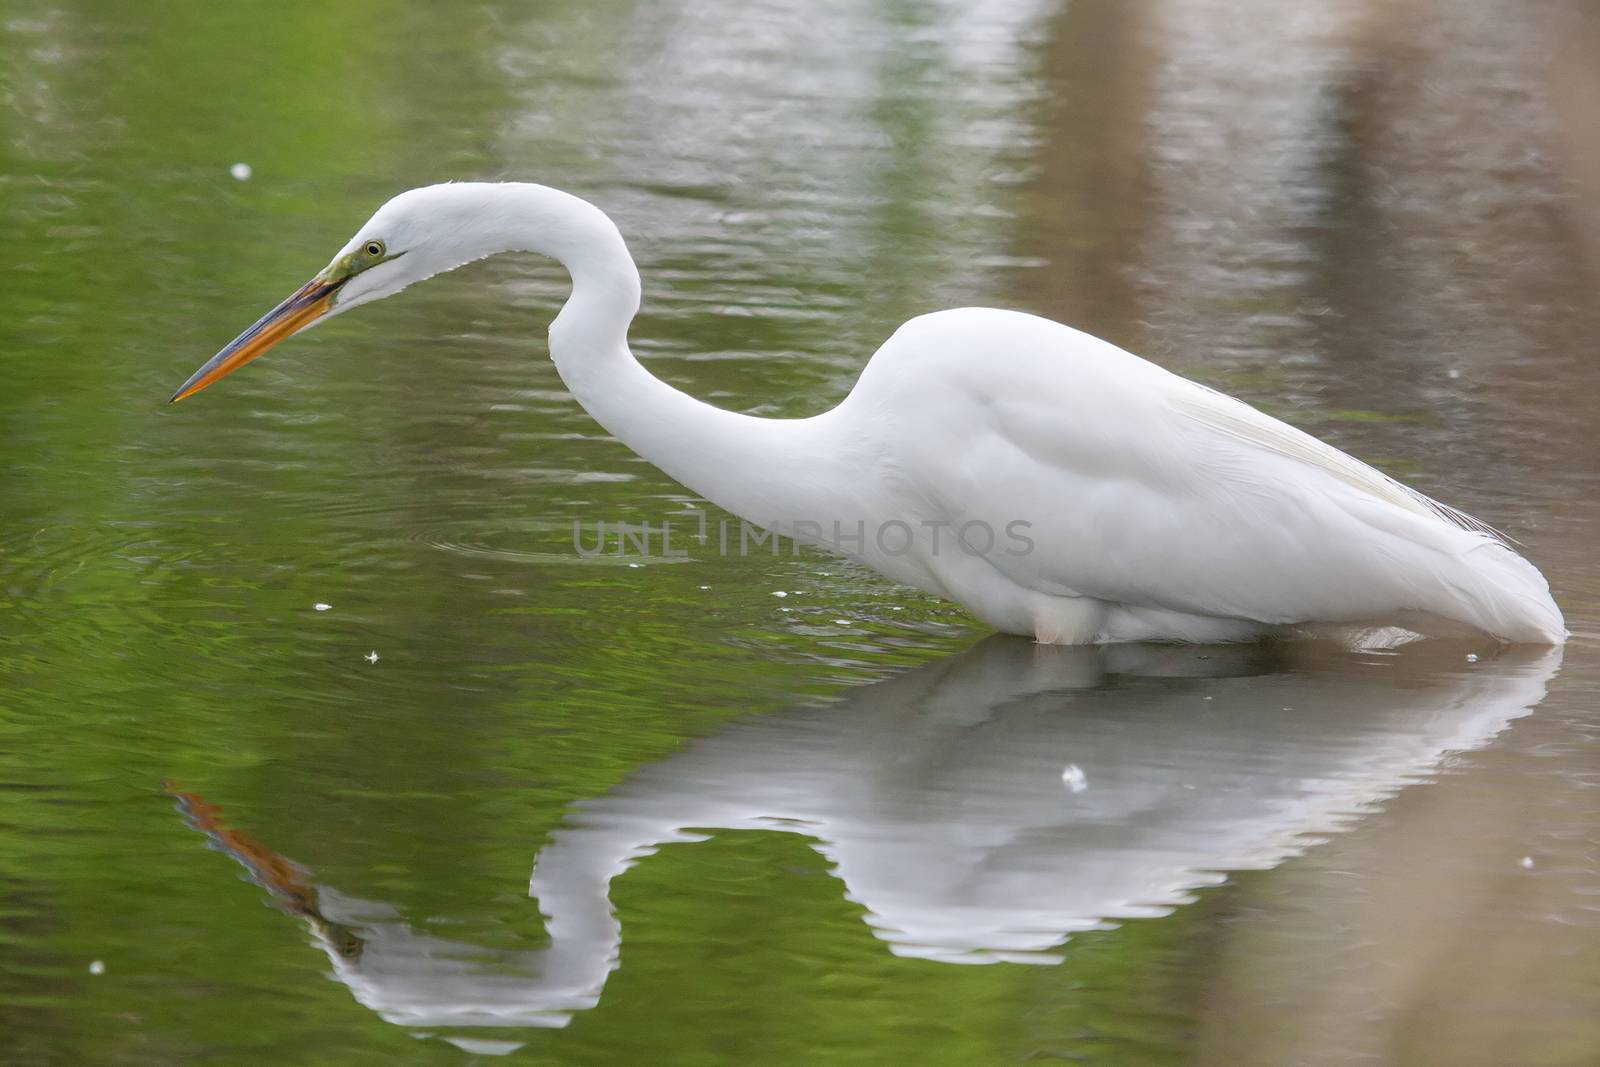 Great White Egret fishing by Coffee999